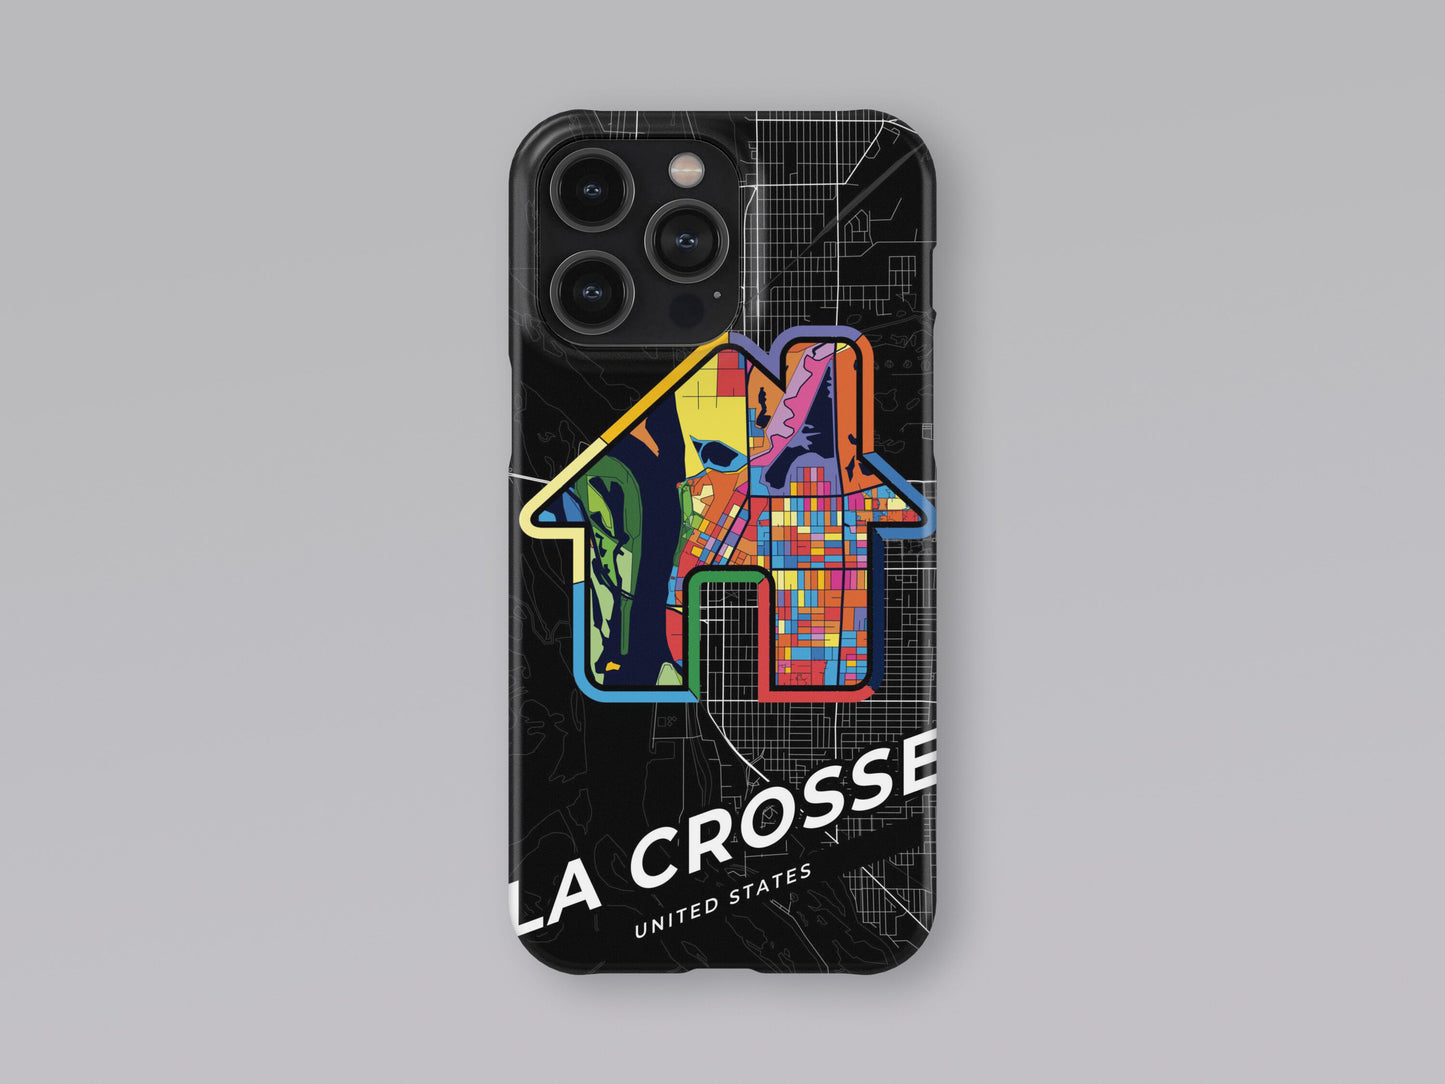 La Crosse Wisconsin slim phone case with colorful icon. Birthday, wedding or housewarming gift. Couple match cases. 3